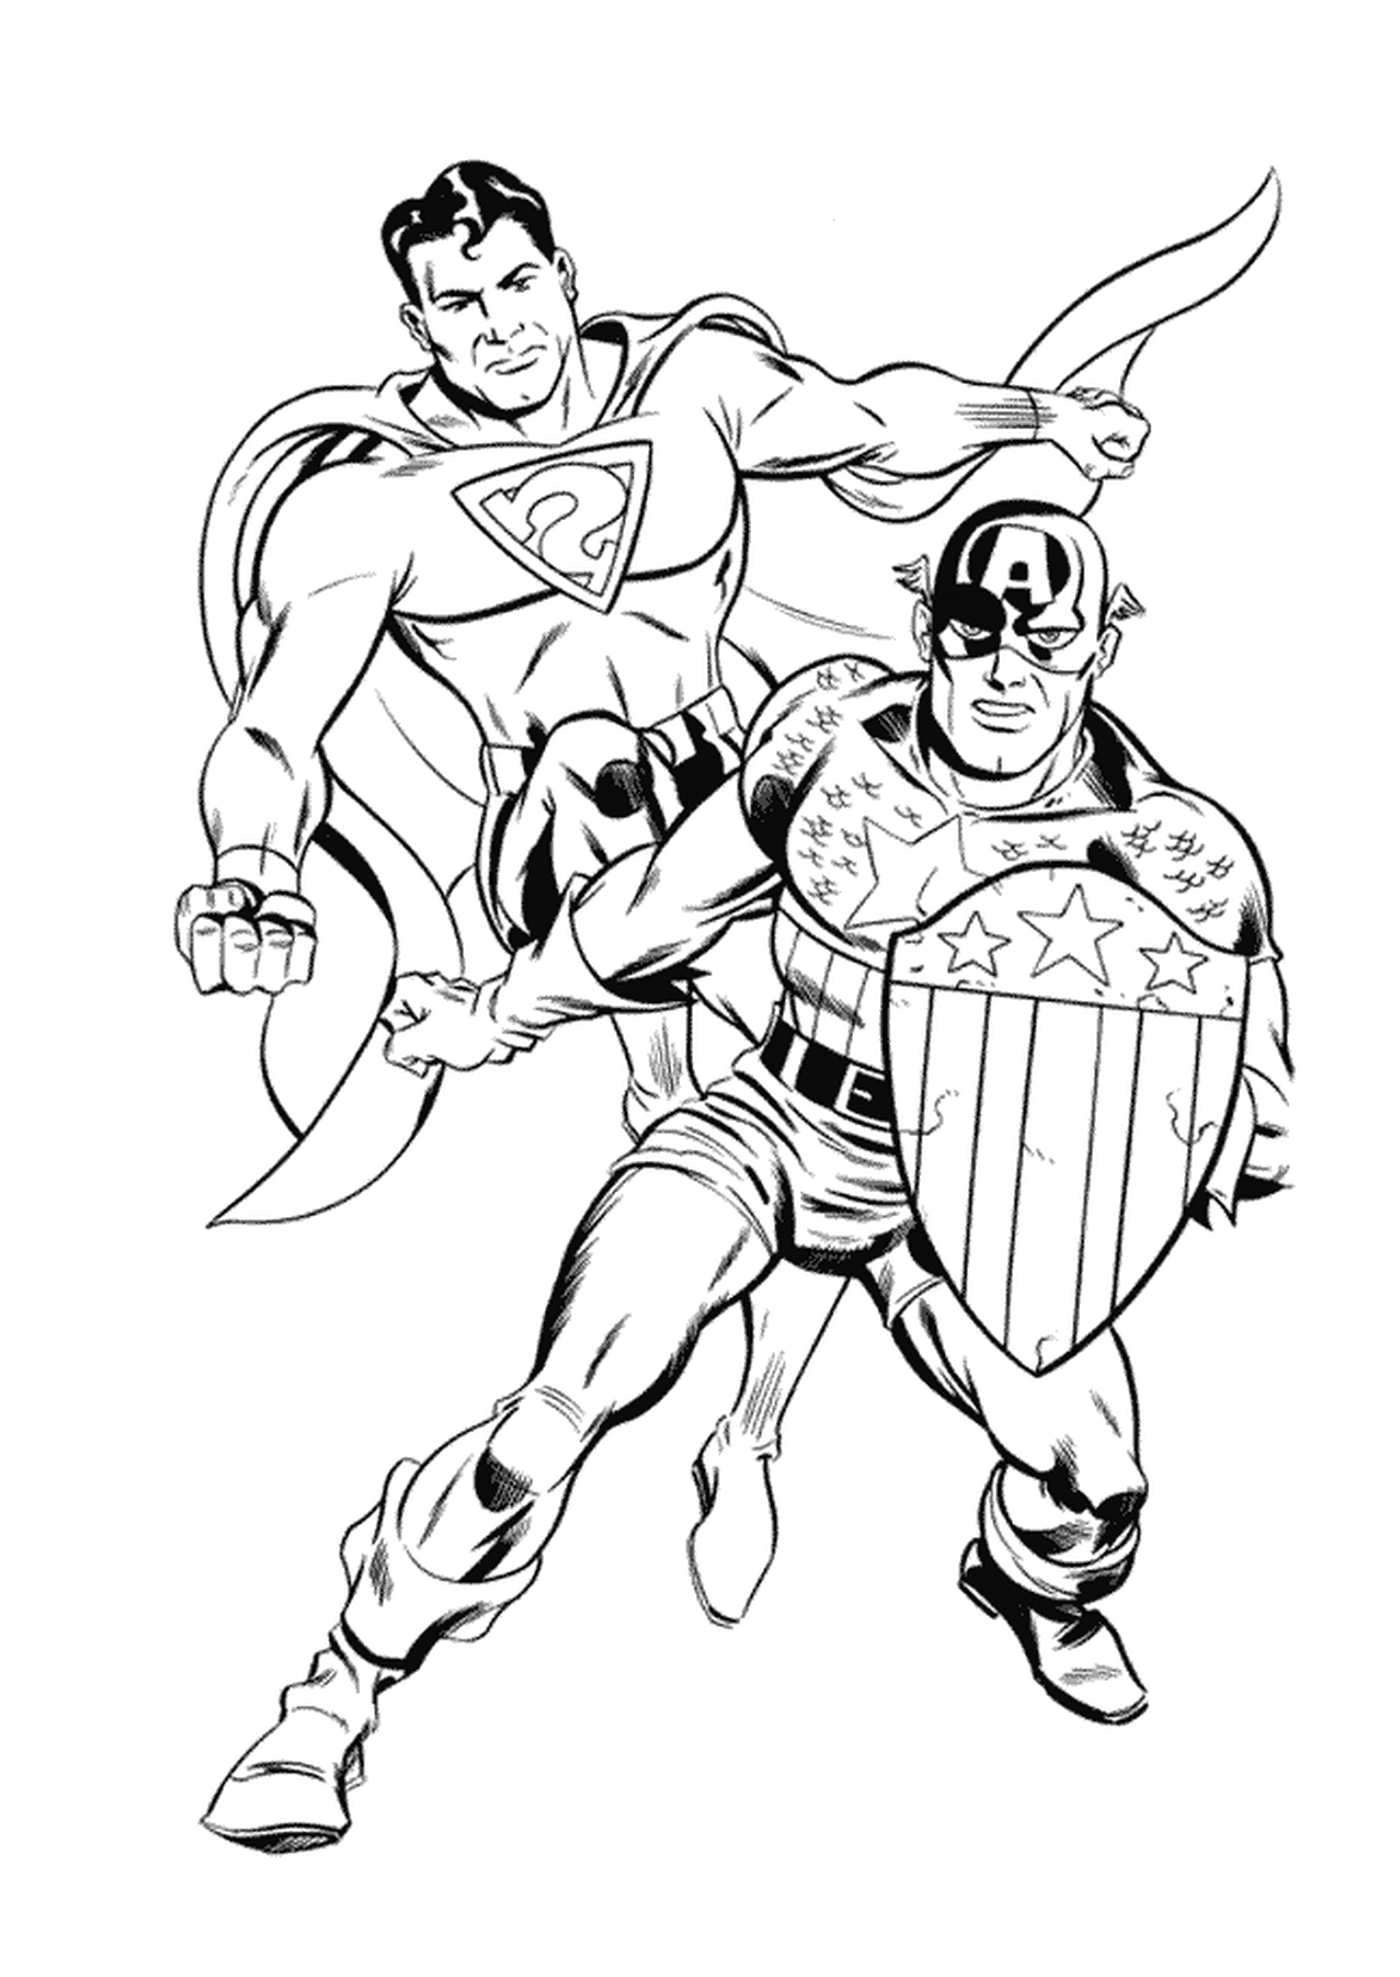  Image of two superheroes, Captain America coloring 35 